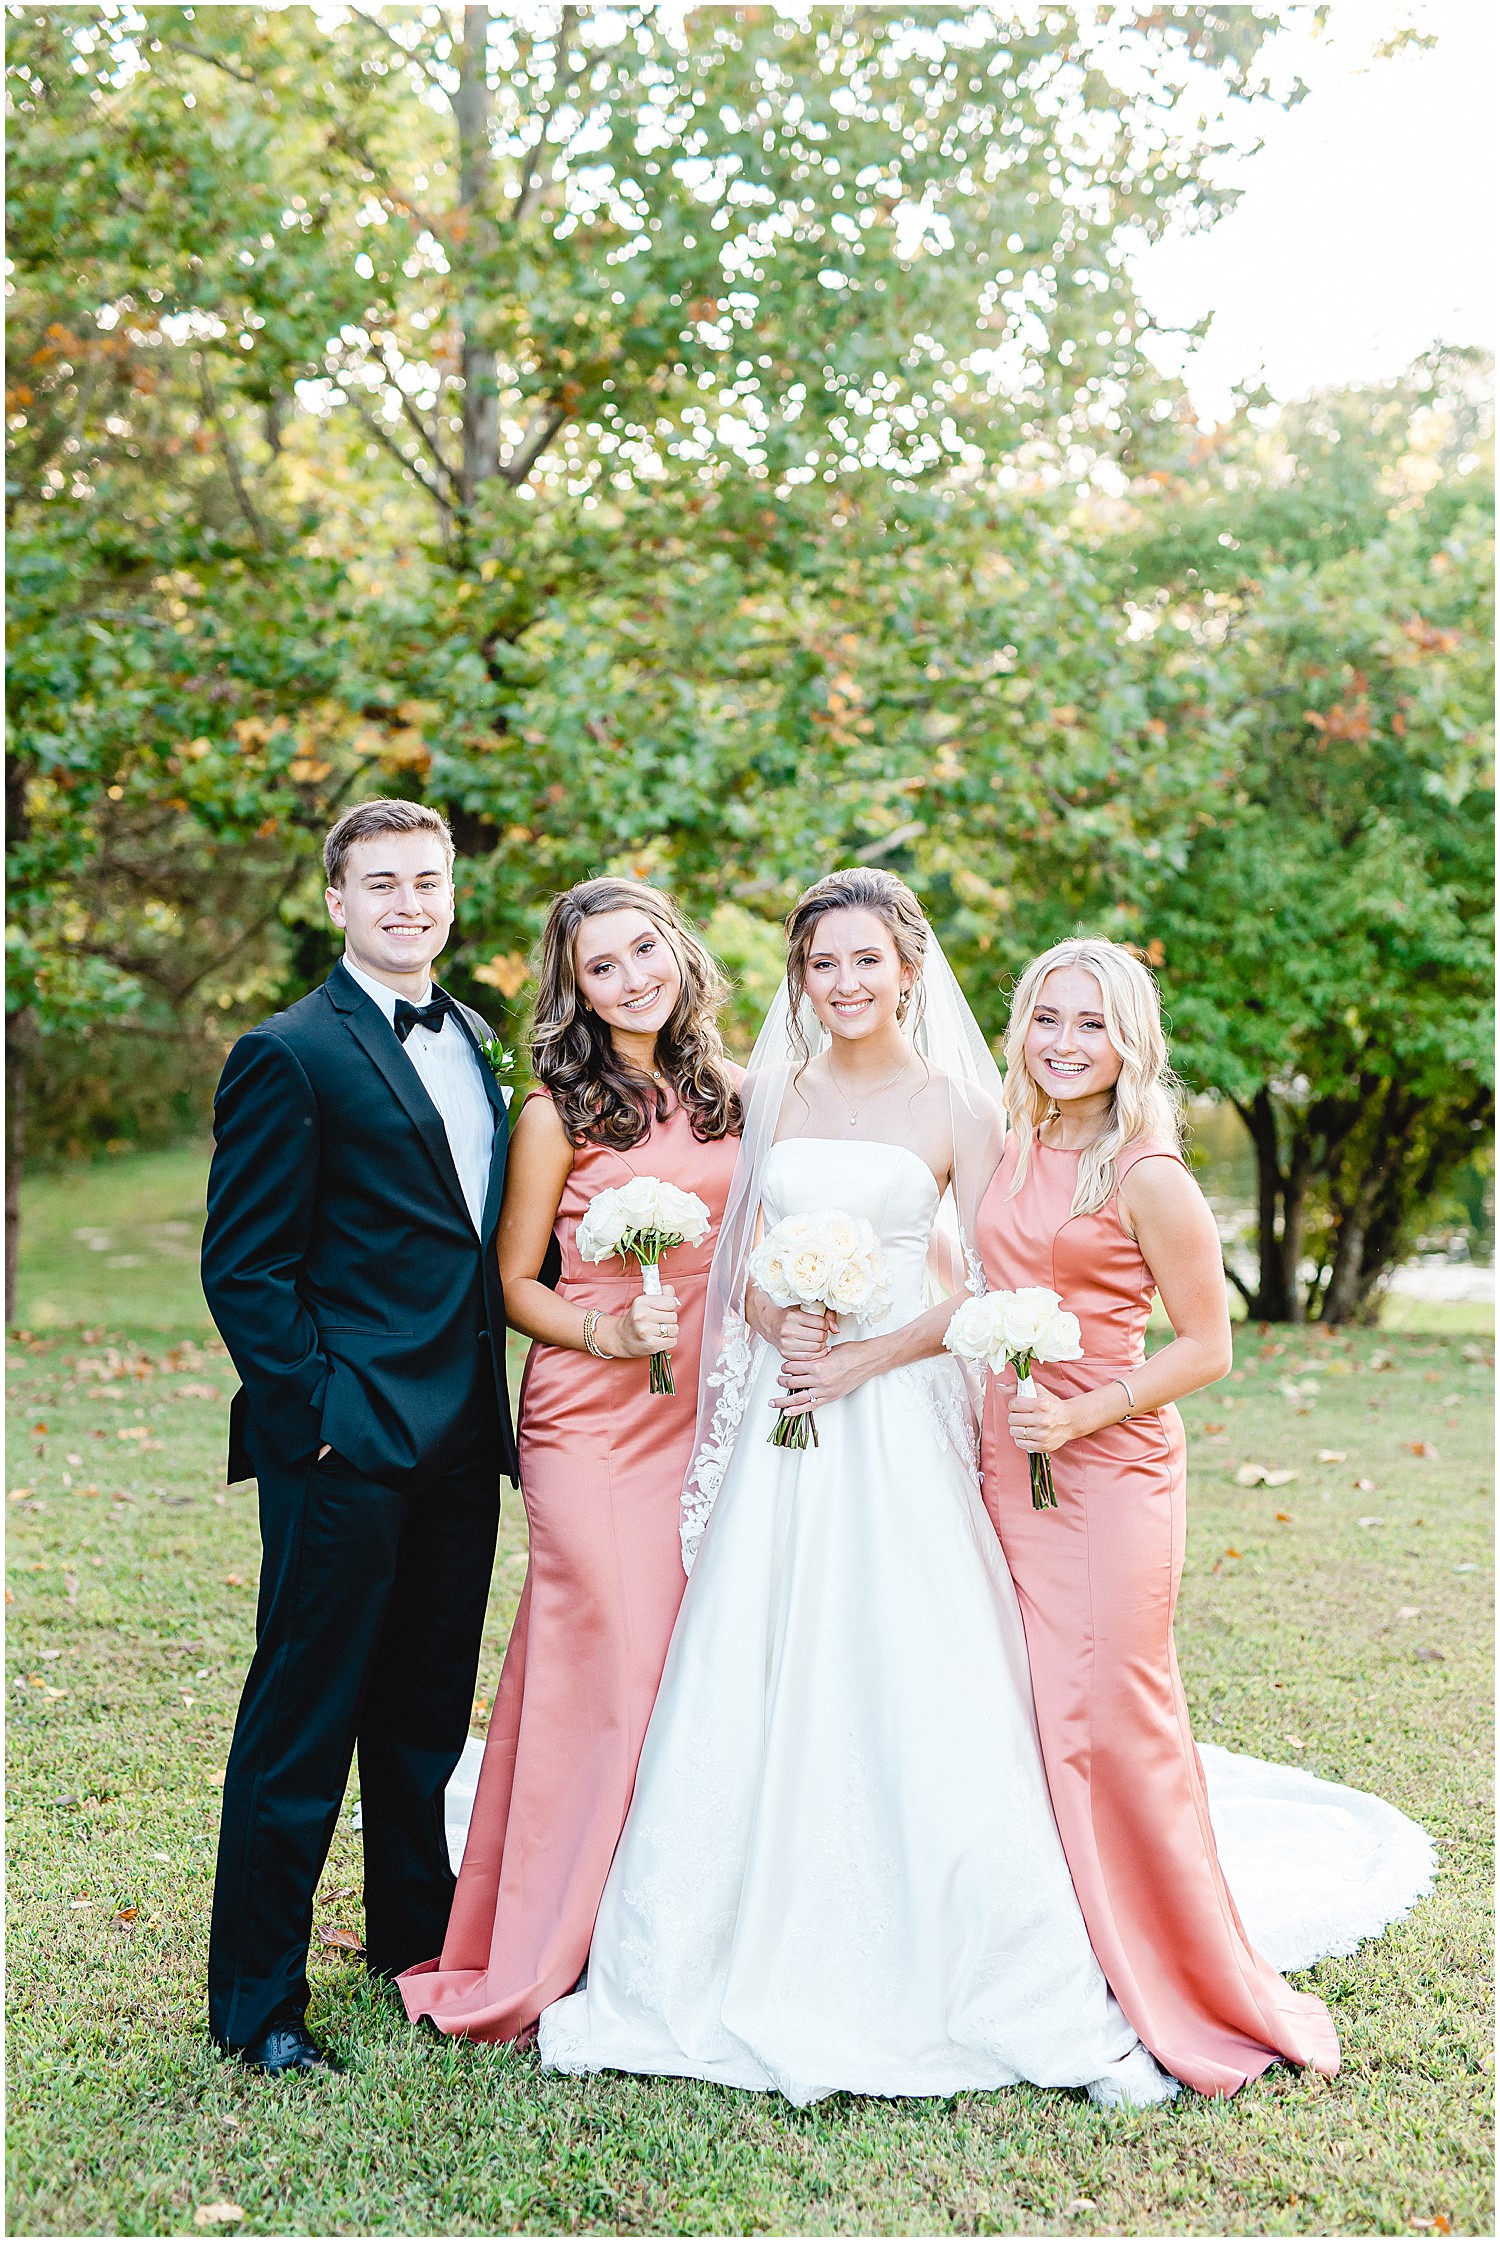 bride and her siblings smiling during wedding party portraits on wedding day